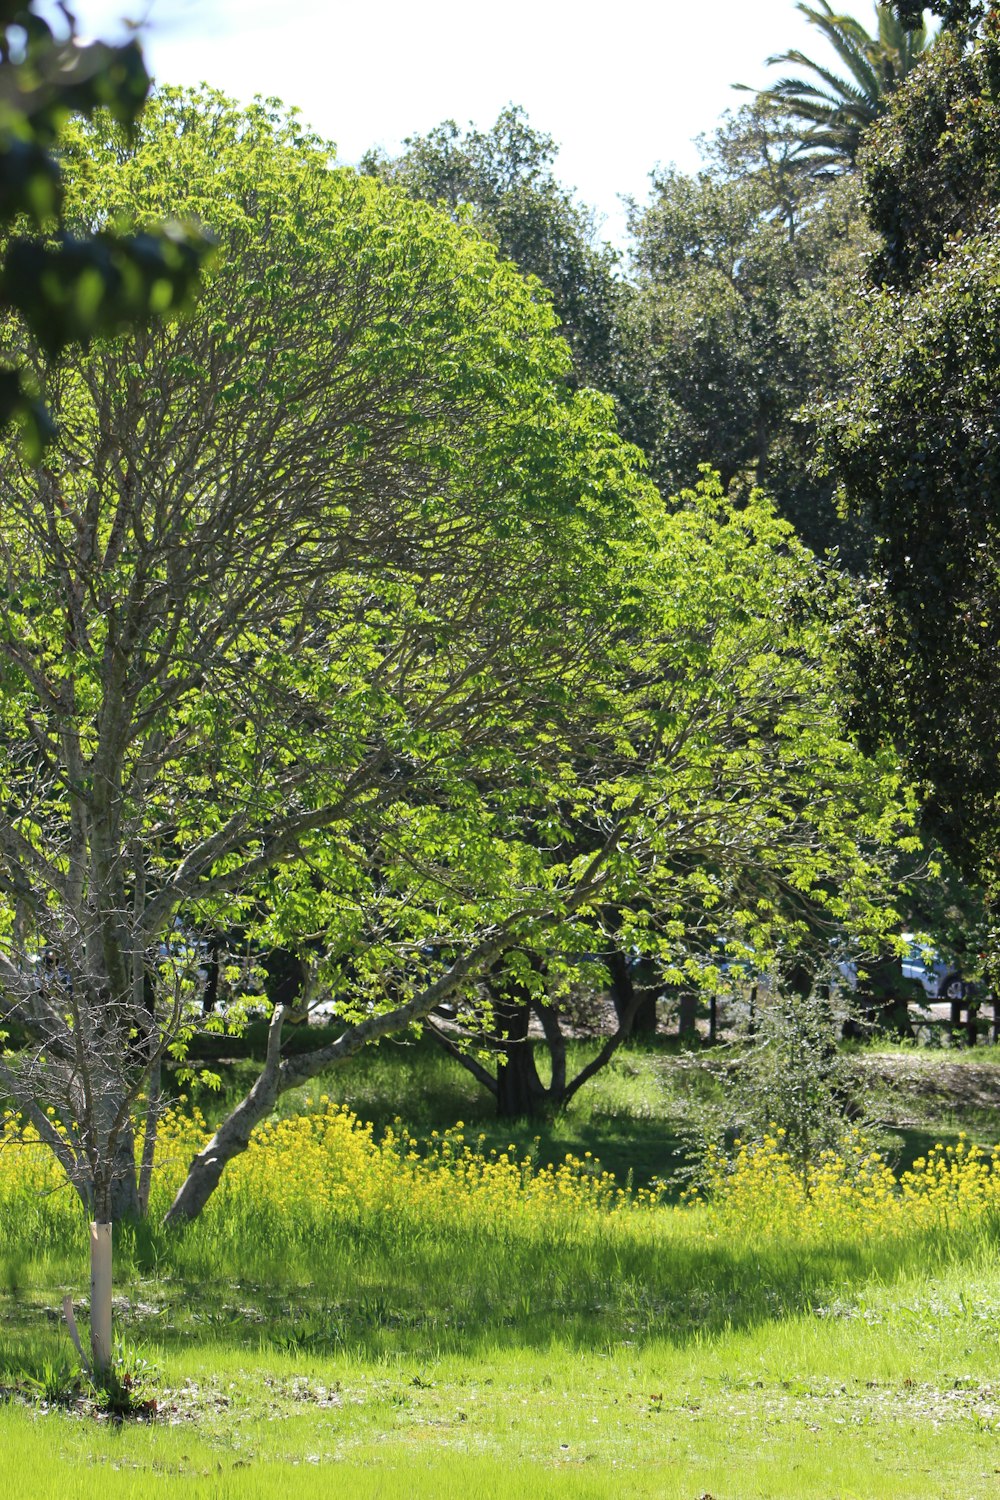 a large tree in a grassy area with yellow flowers